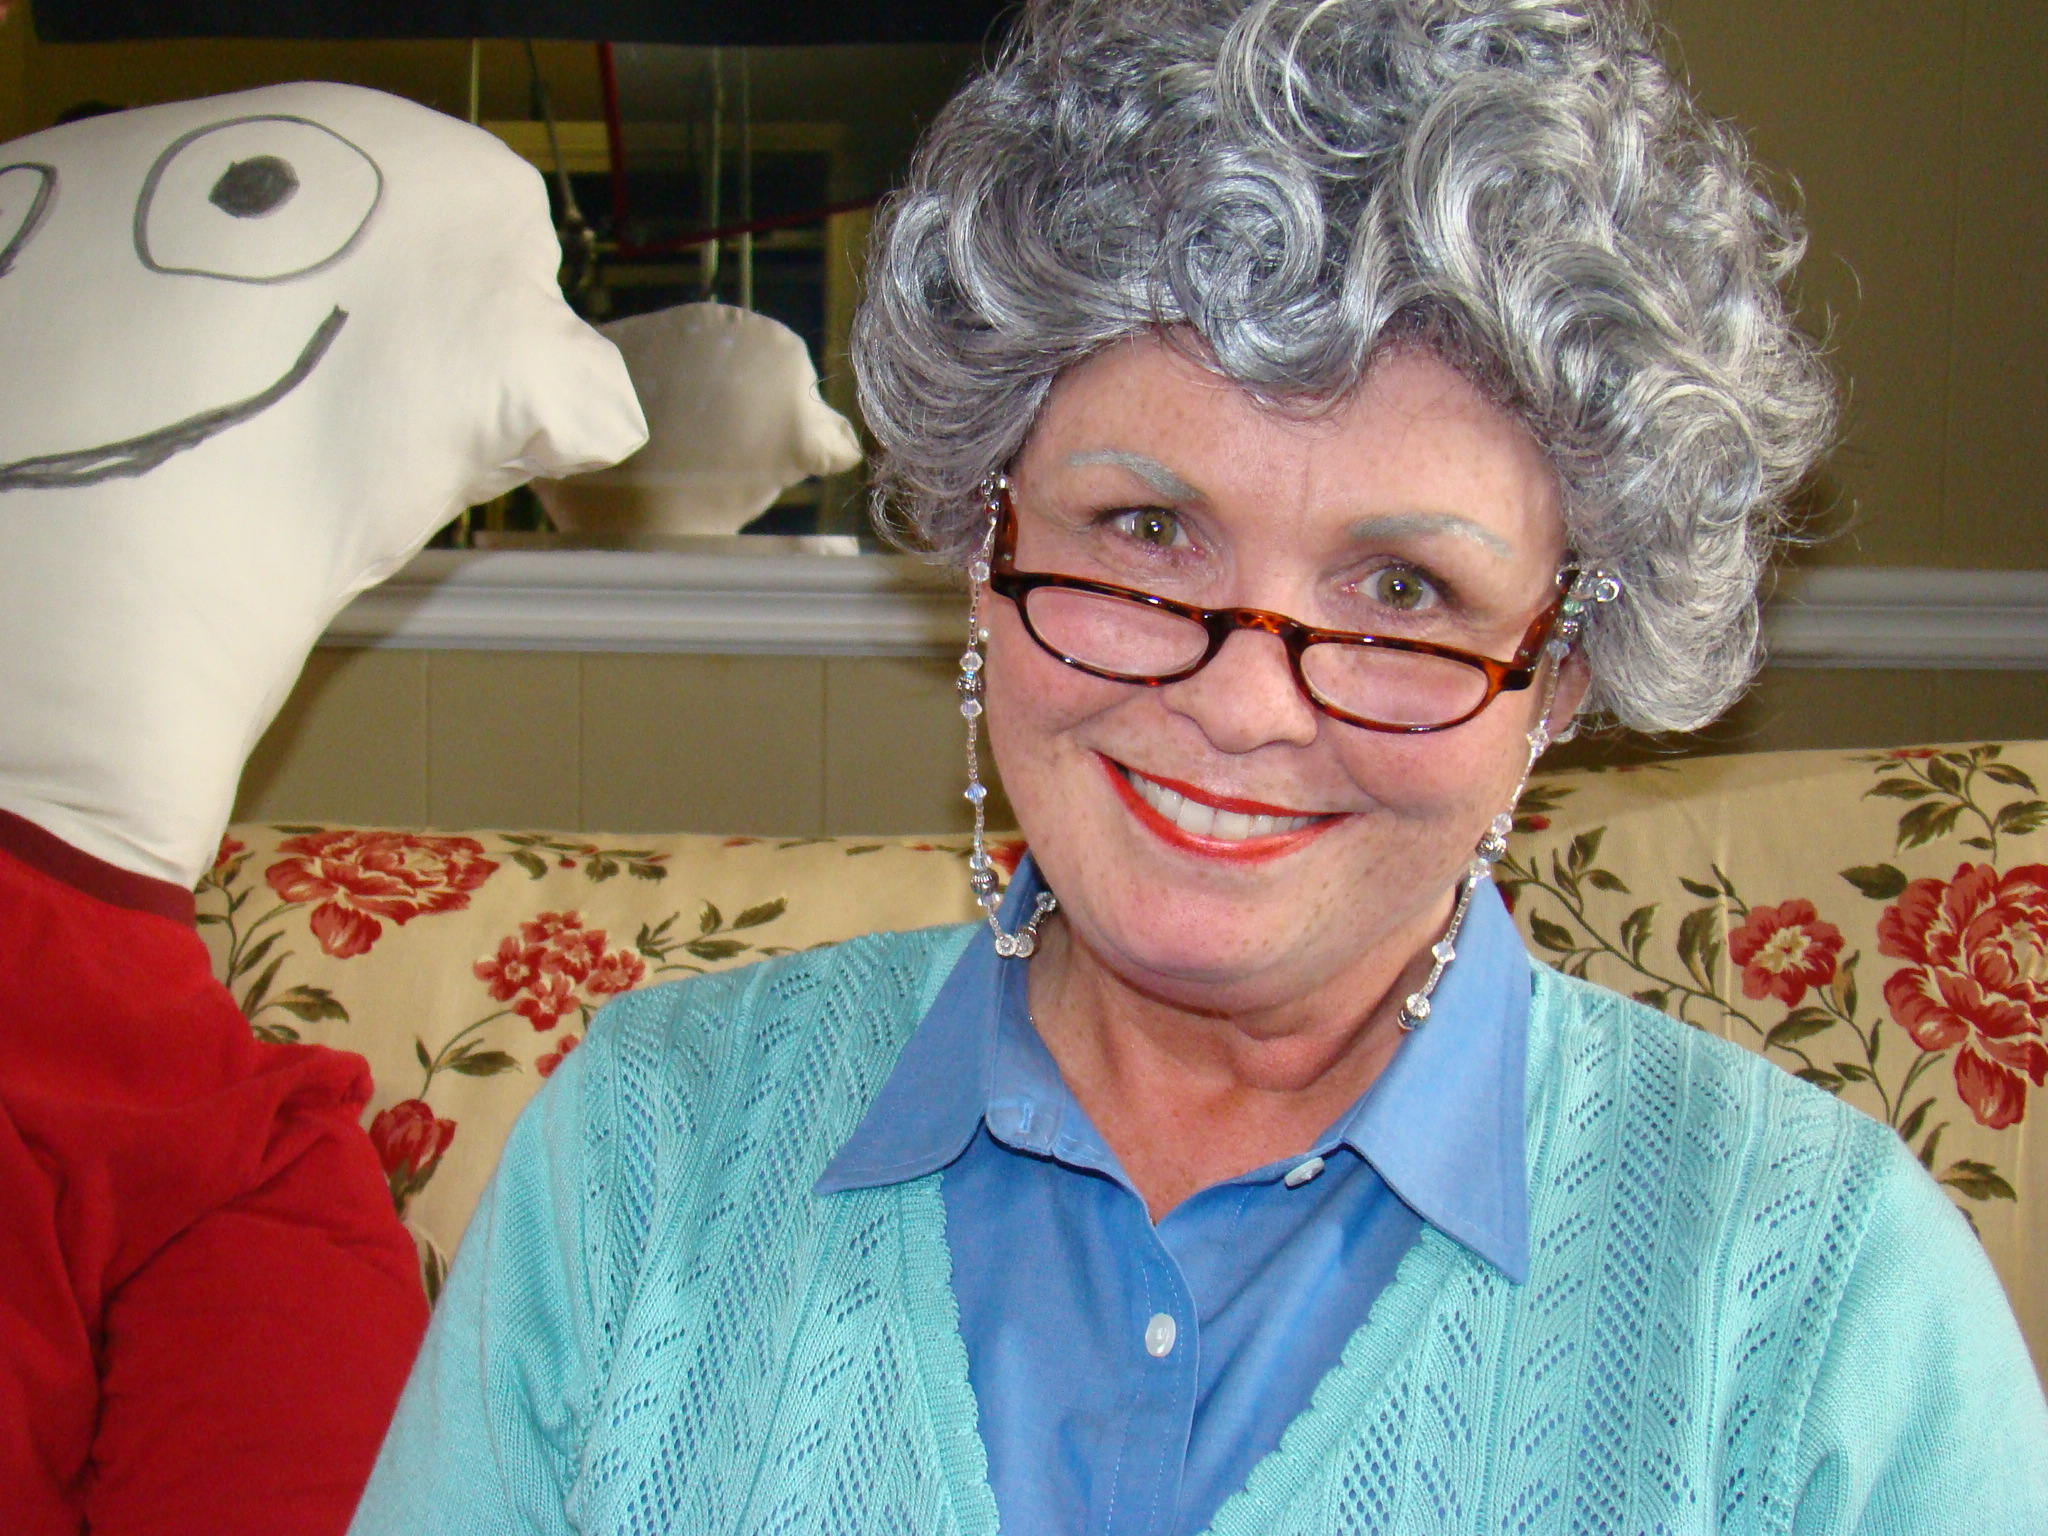 On set playing Granny for the Cartoon Network